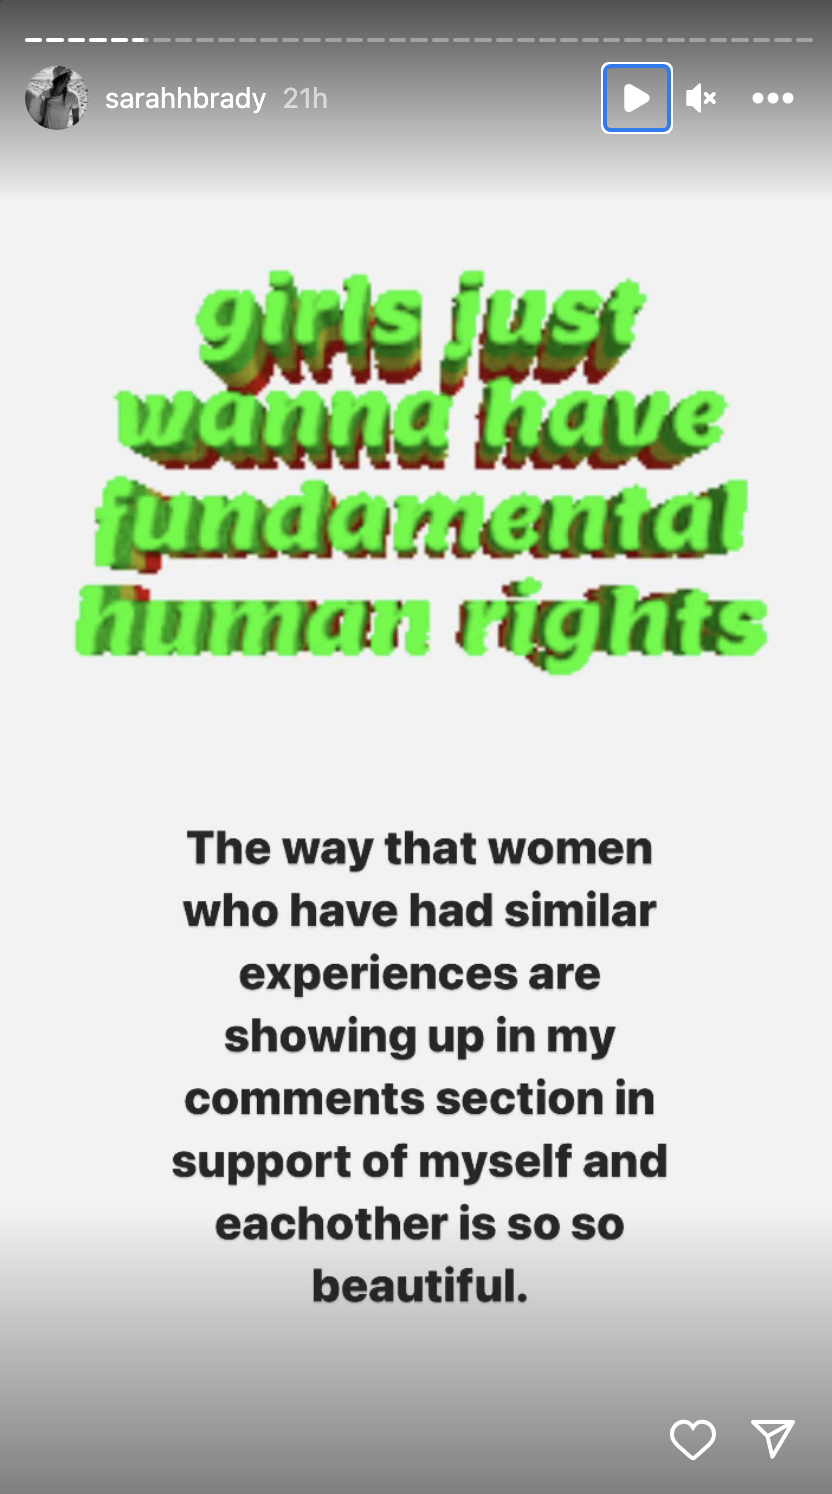 Sarah said in her iG stories, &quot;girls just wanna have fundamental human rights&quot;